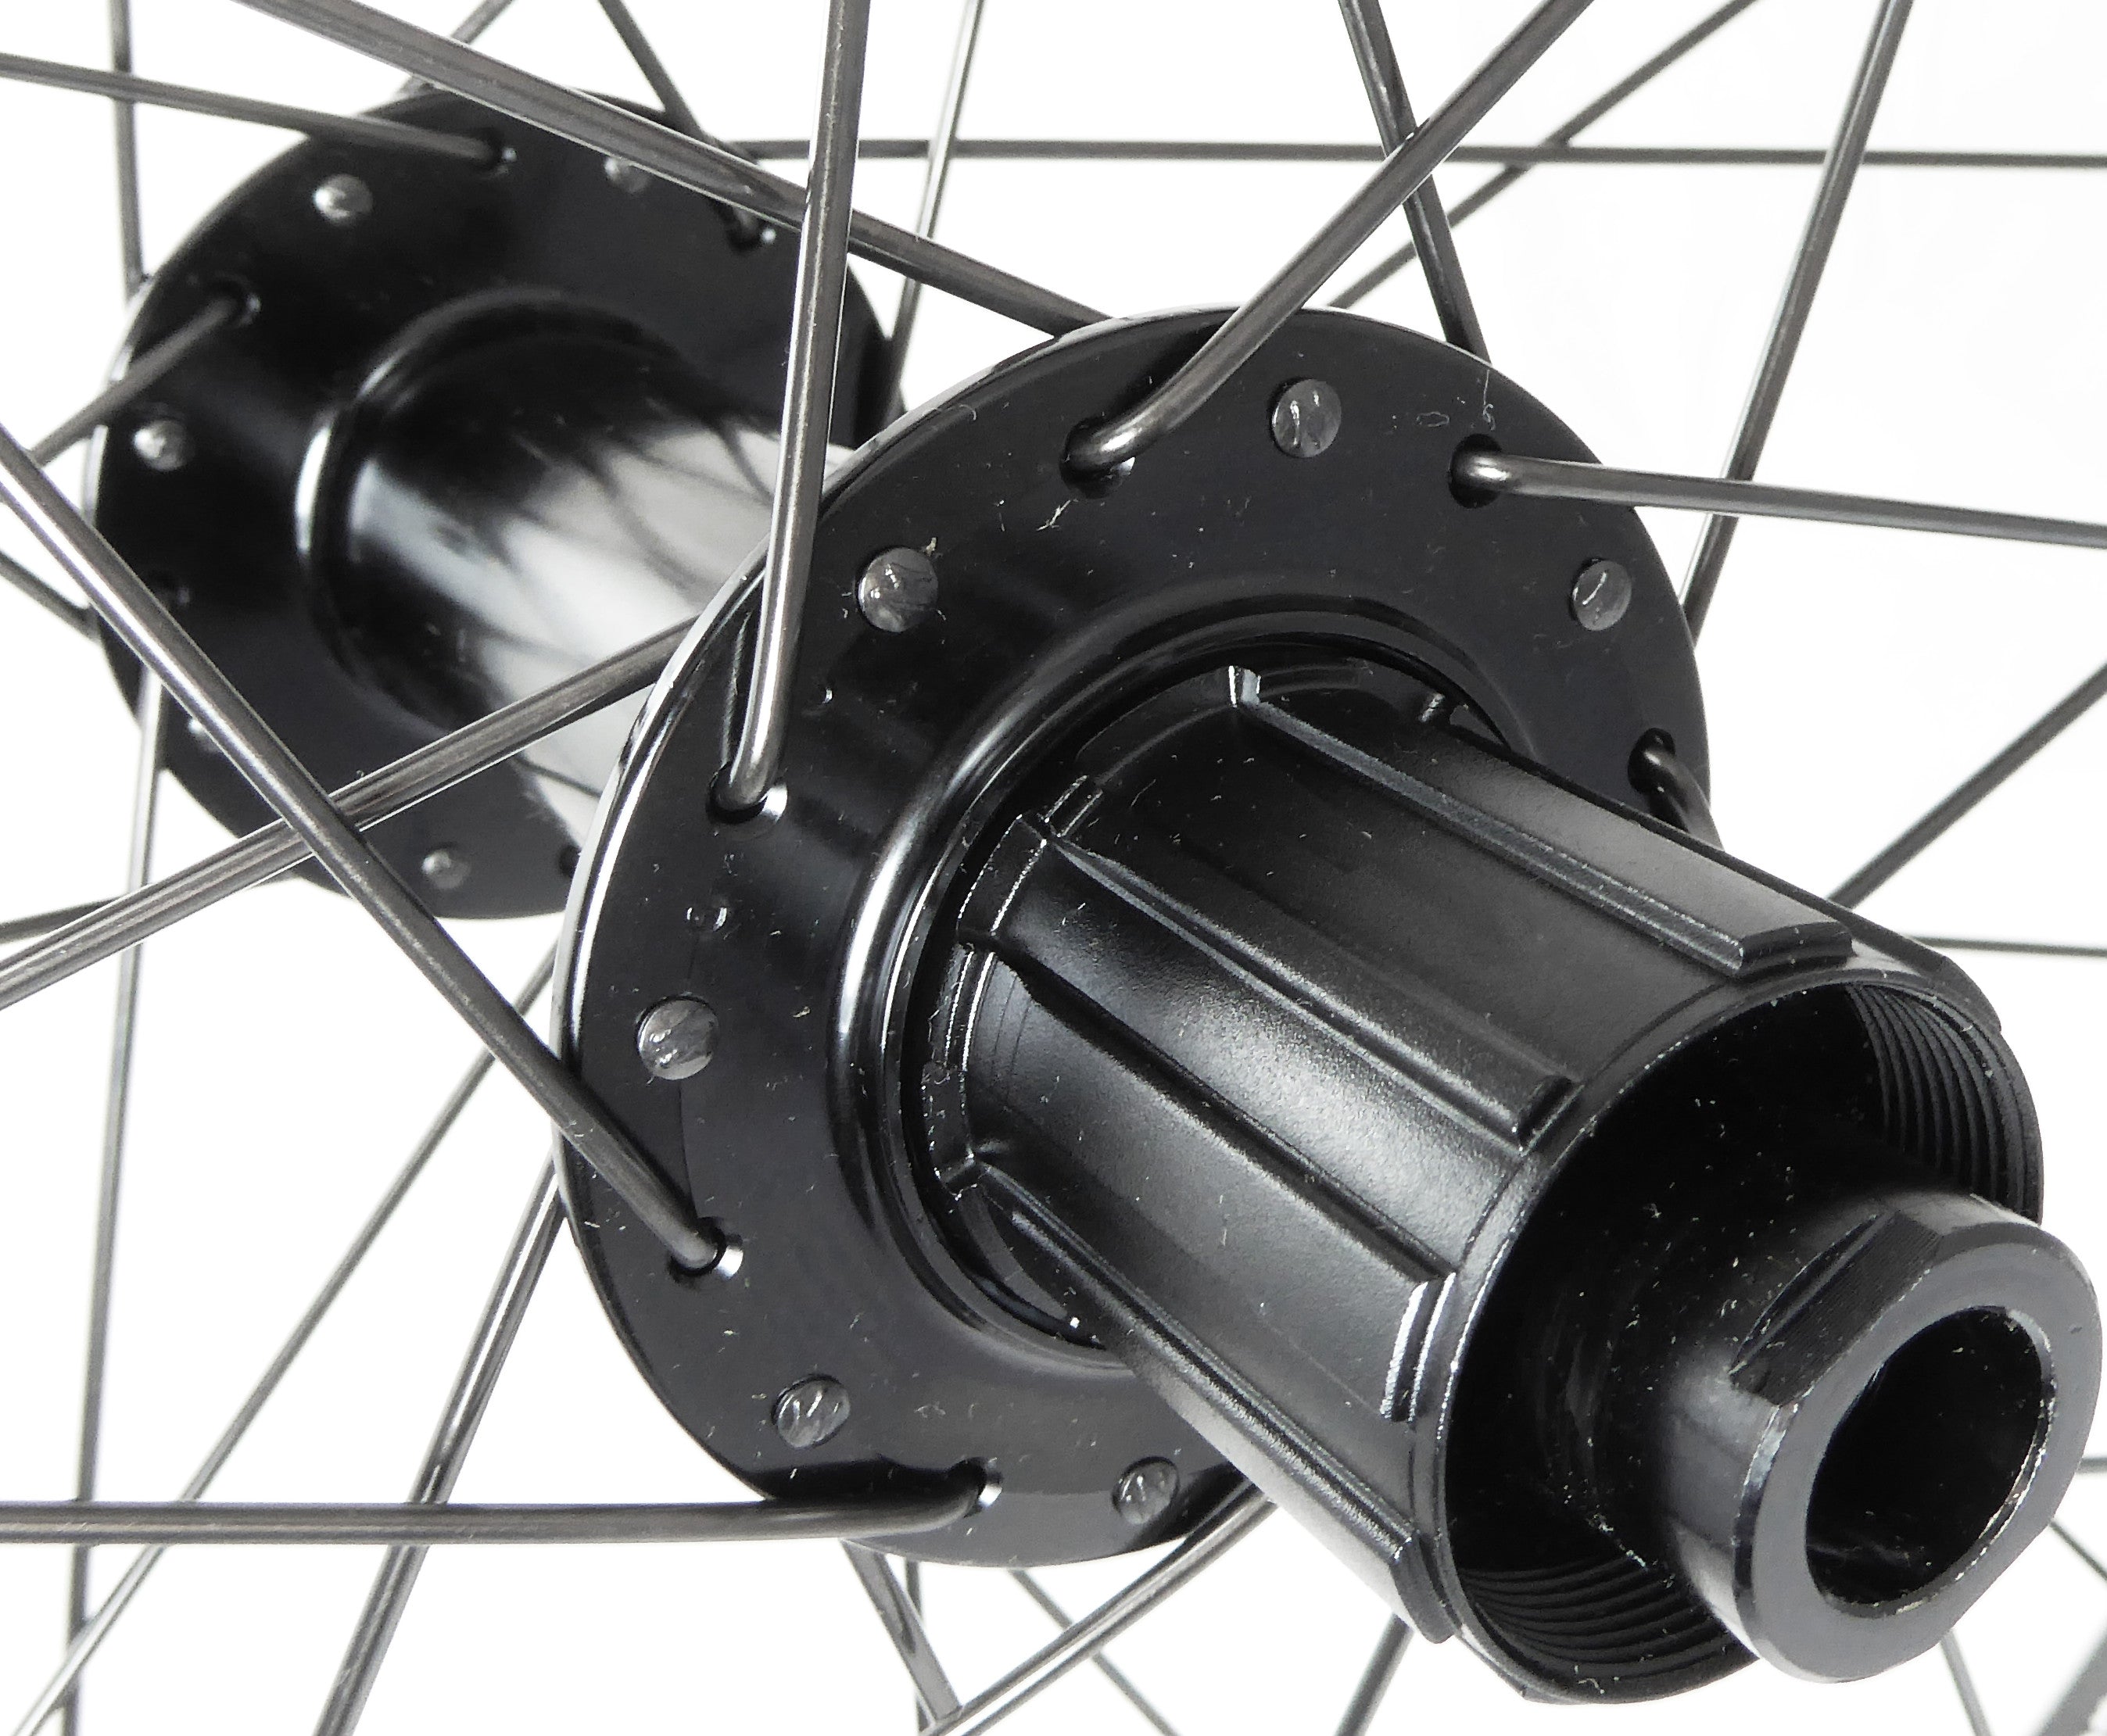 A closeup of the rear hub with a cassette type freehub body.